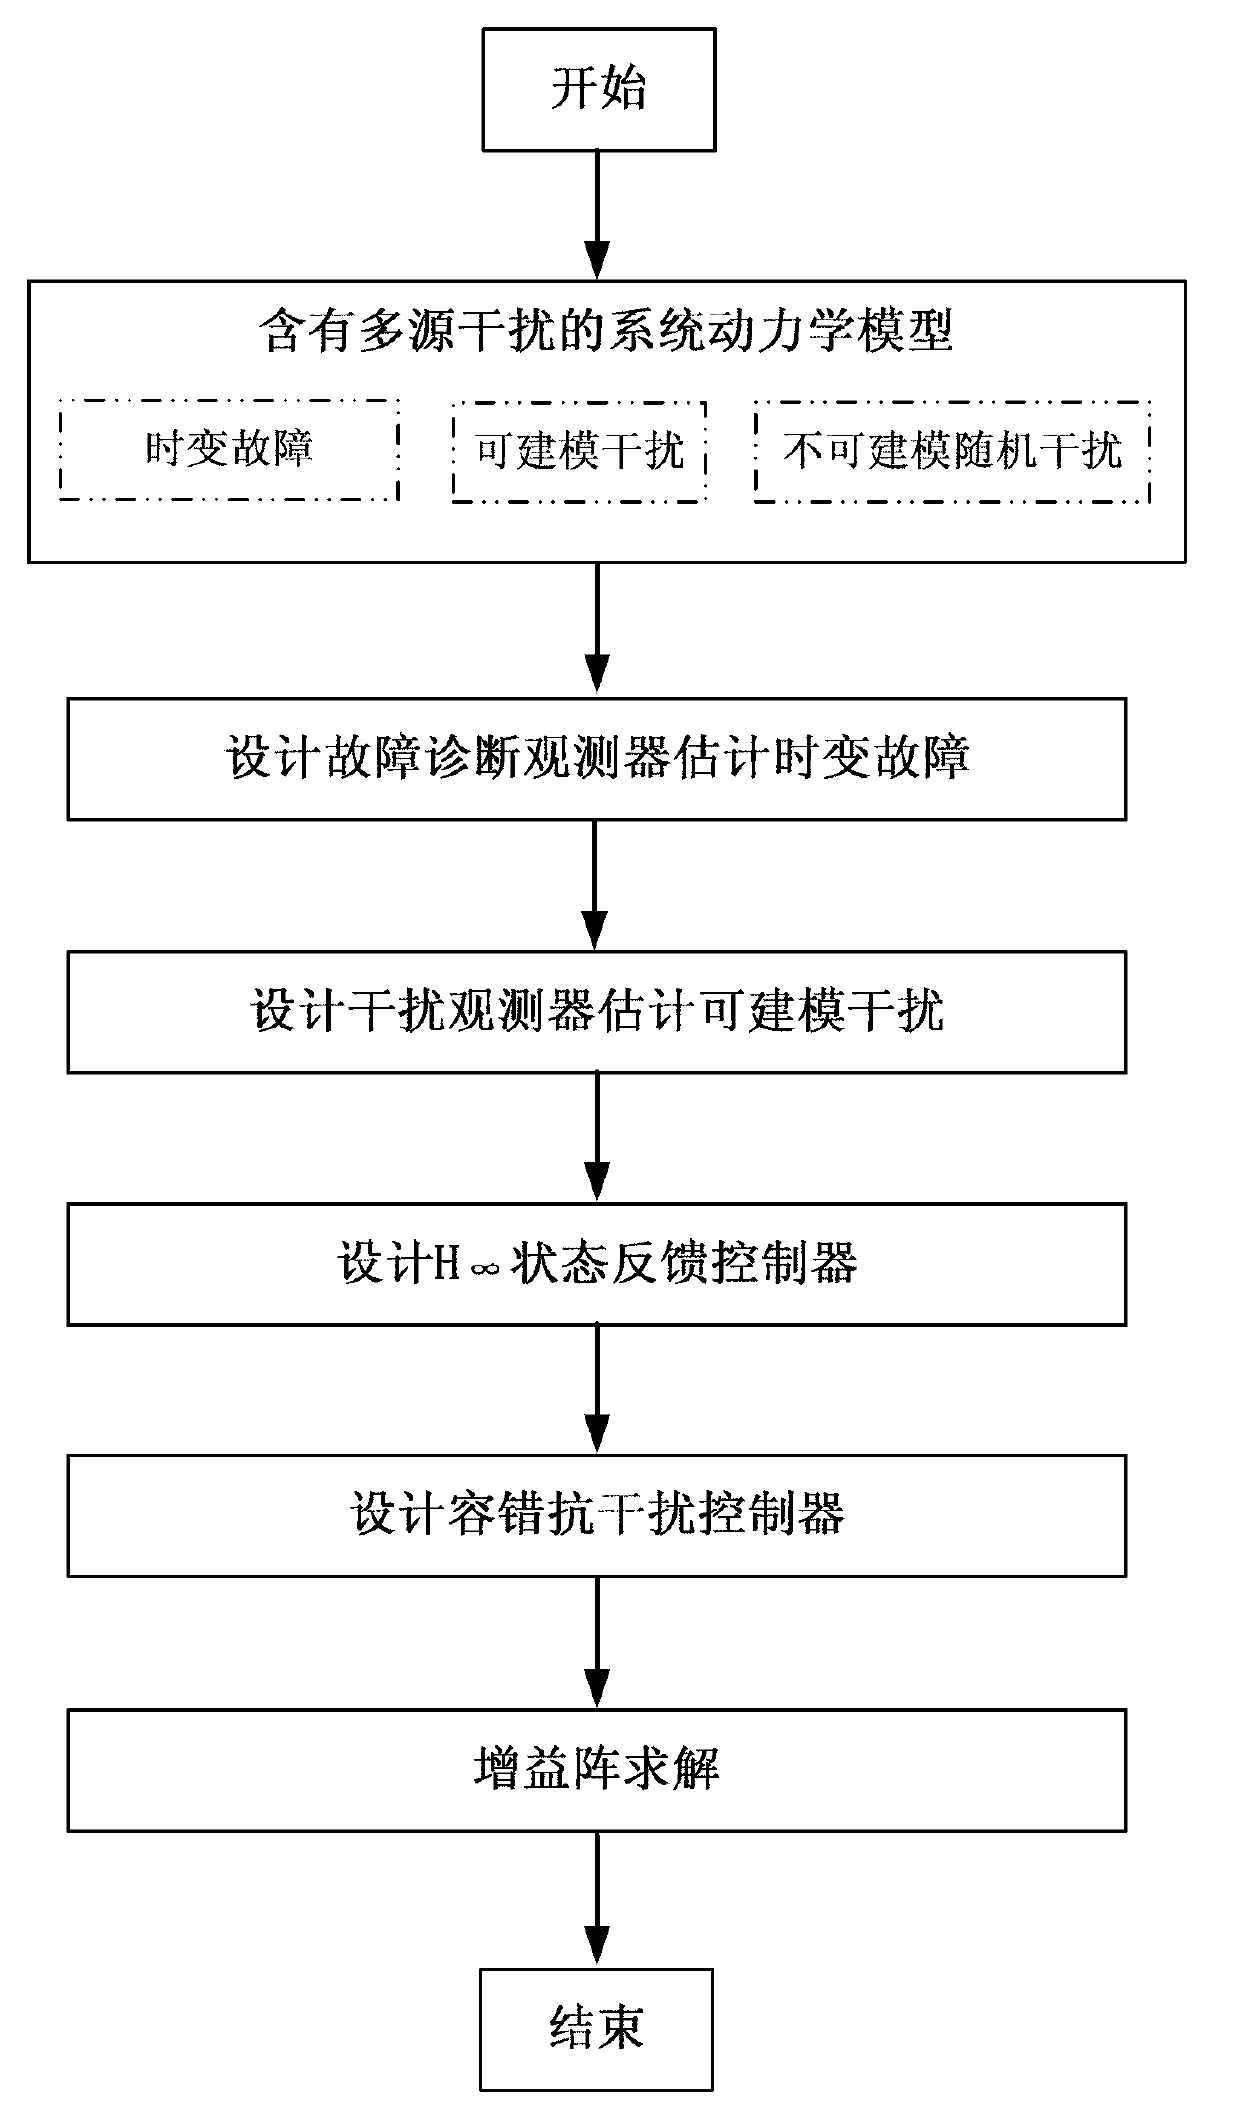 Fault-tolerant anti-interference control method for multisource interference system